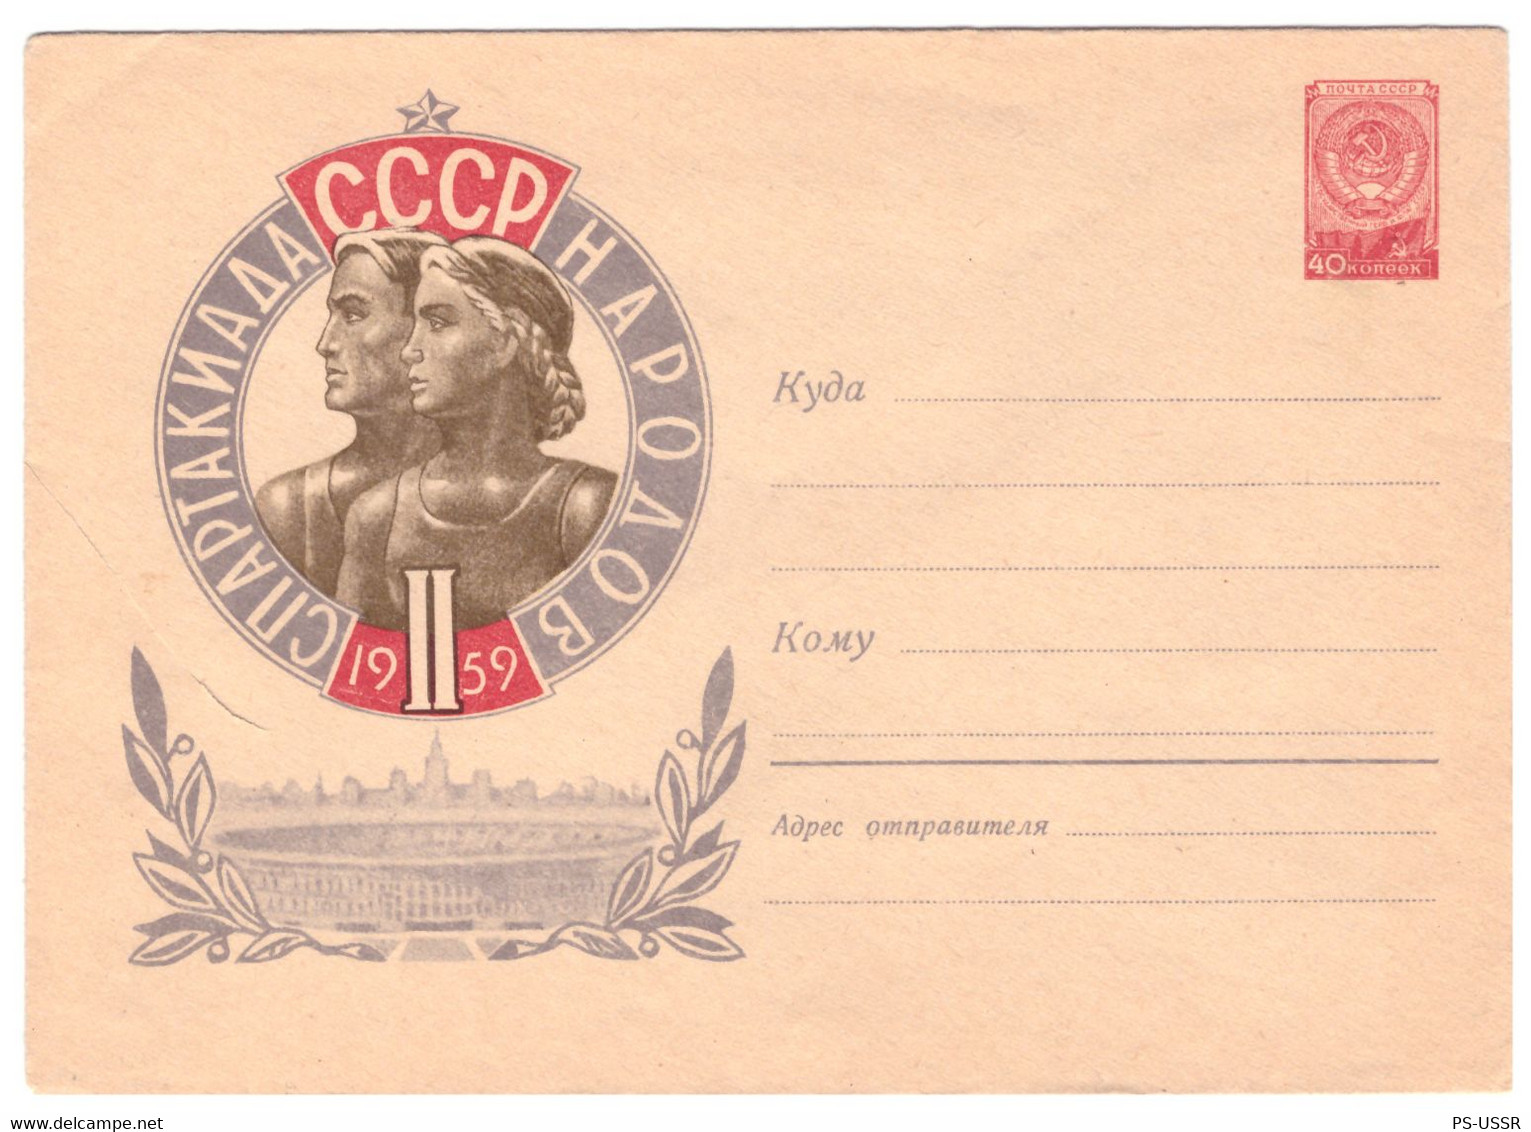 USSR 1959 EMBLEM II SPARTAKIAD OF THE NATIONS PSE UNUSED COVER ILLUSTRATED STAMPED ENVELOPE GANZSACHE SOVIET UNION - 1950-59